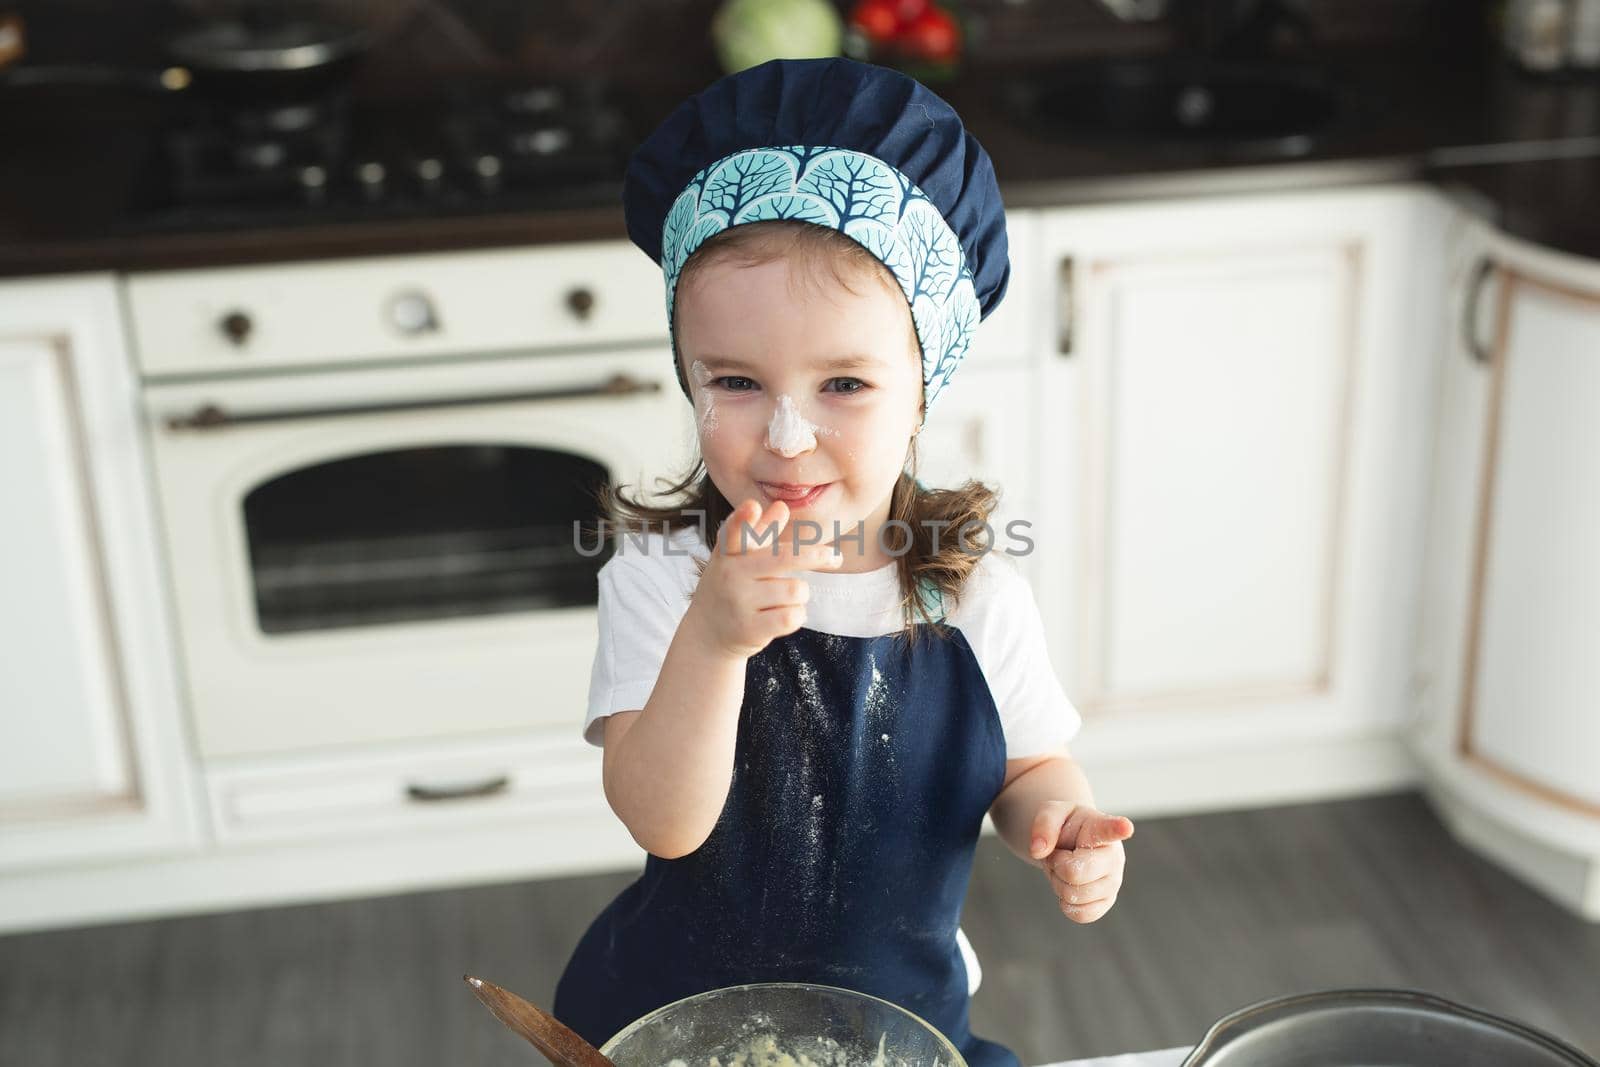 Cute little girl in apron and chef hat is flattening the dough using a rolling pin, looking at camera and smiling while baking